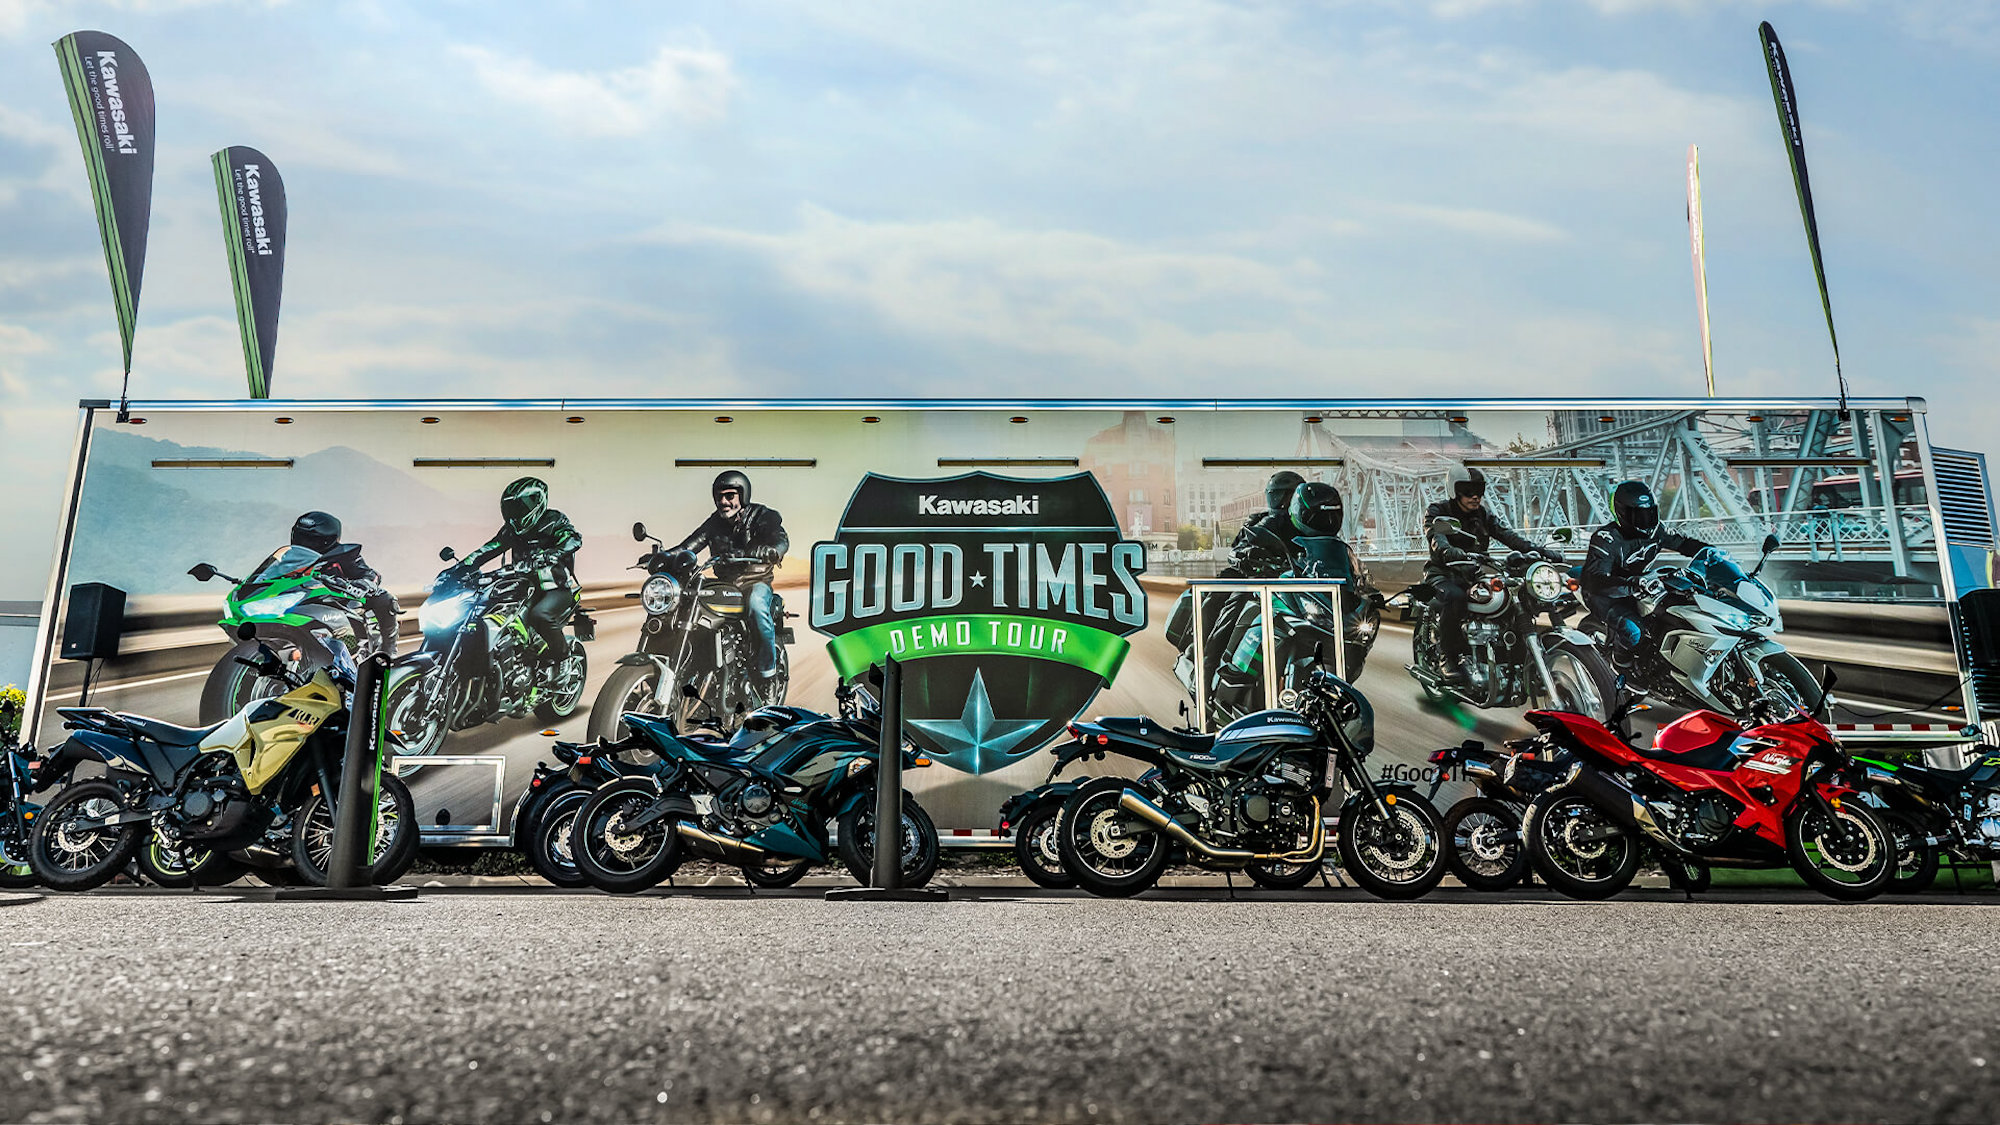 The good times Demo Tour, brought back for 2023! Media sourced from Pasco Powersports.